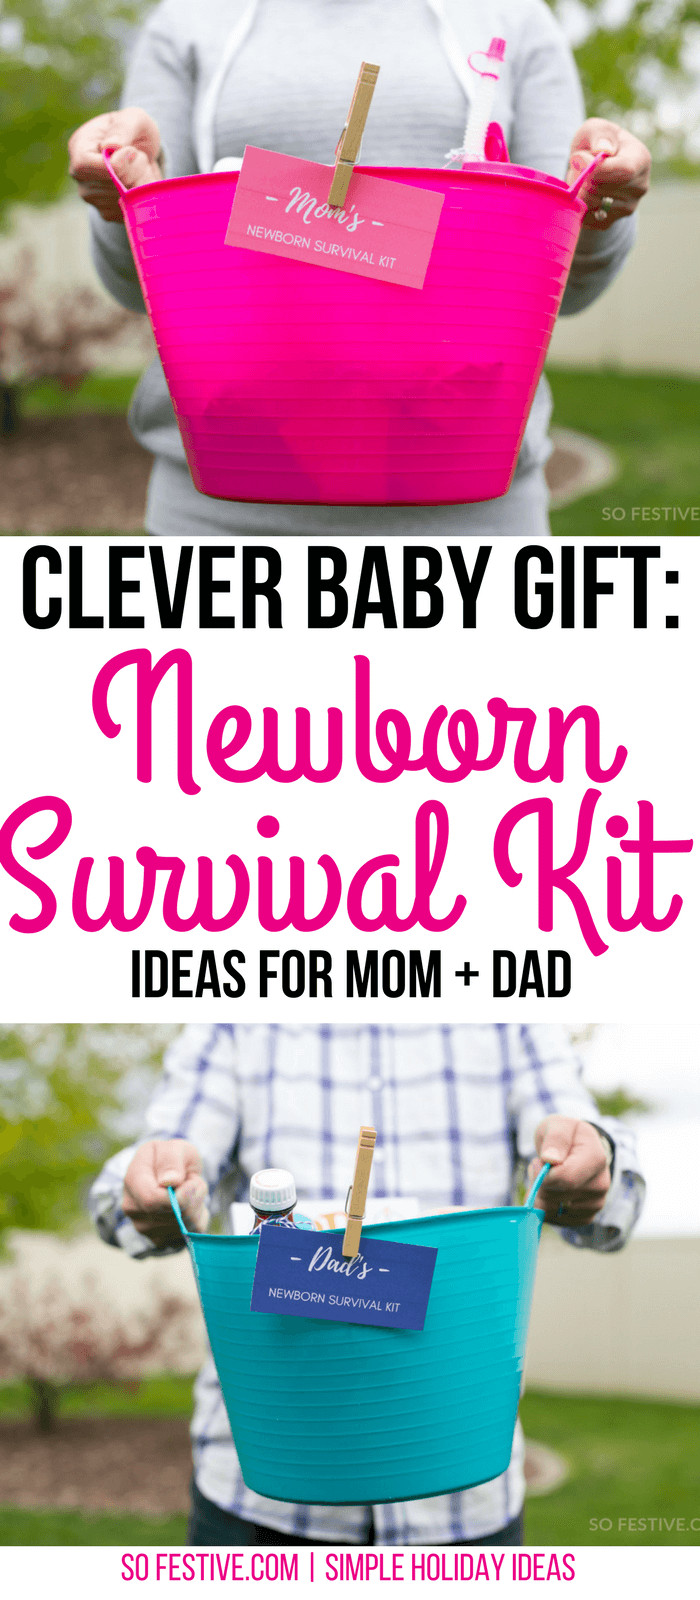 New Baby Gift Ideas For Parents
 Newborn Survival Kit Baby Gift For Parents So Festive